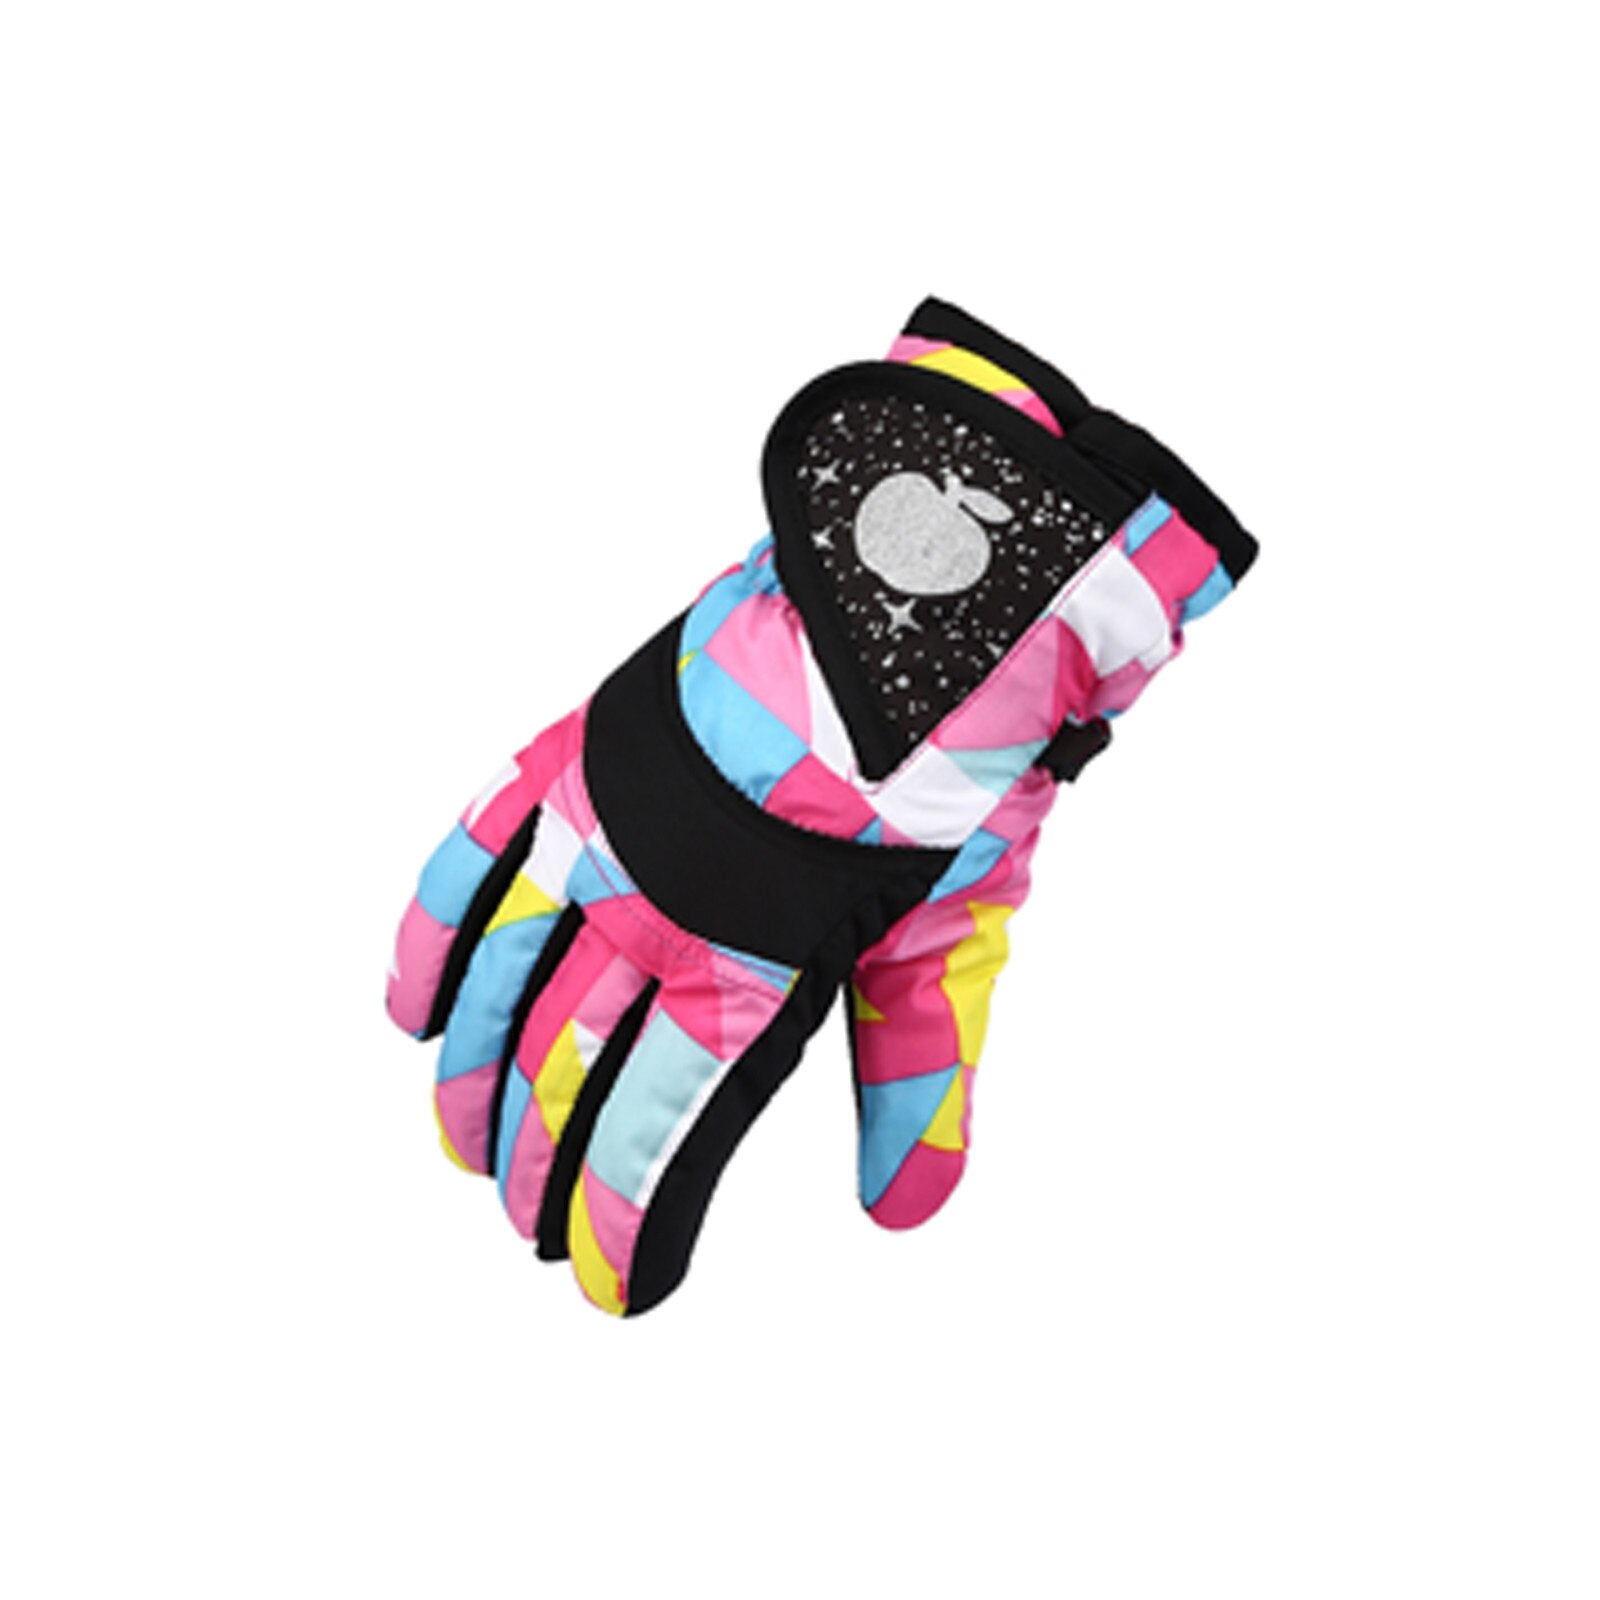 Newest Winter Gloves for Kids Boys Girls Snow Windproof Mittens Outdoor Sports Skiing: C